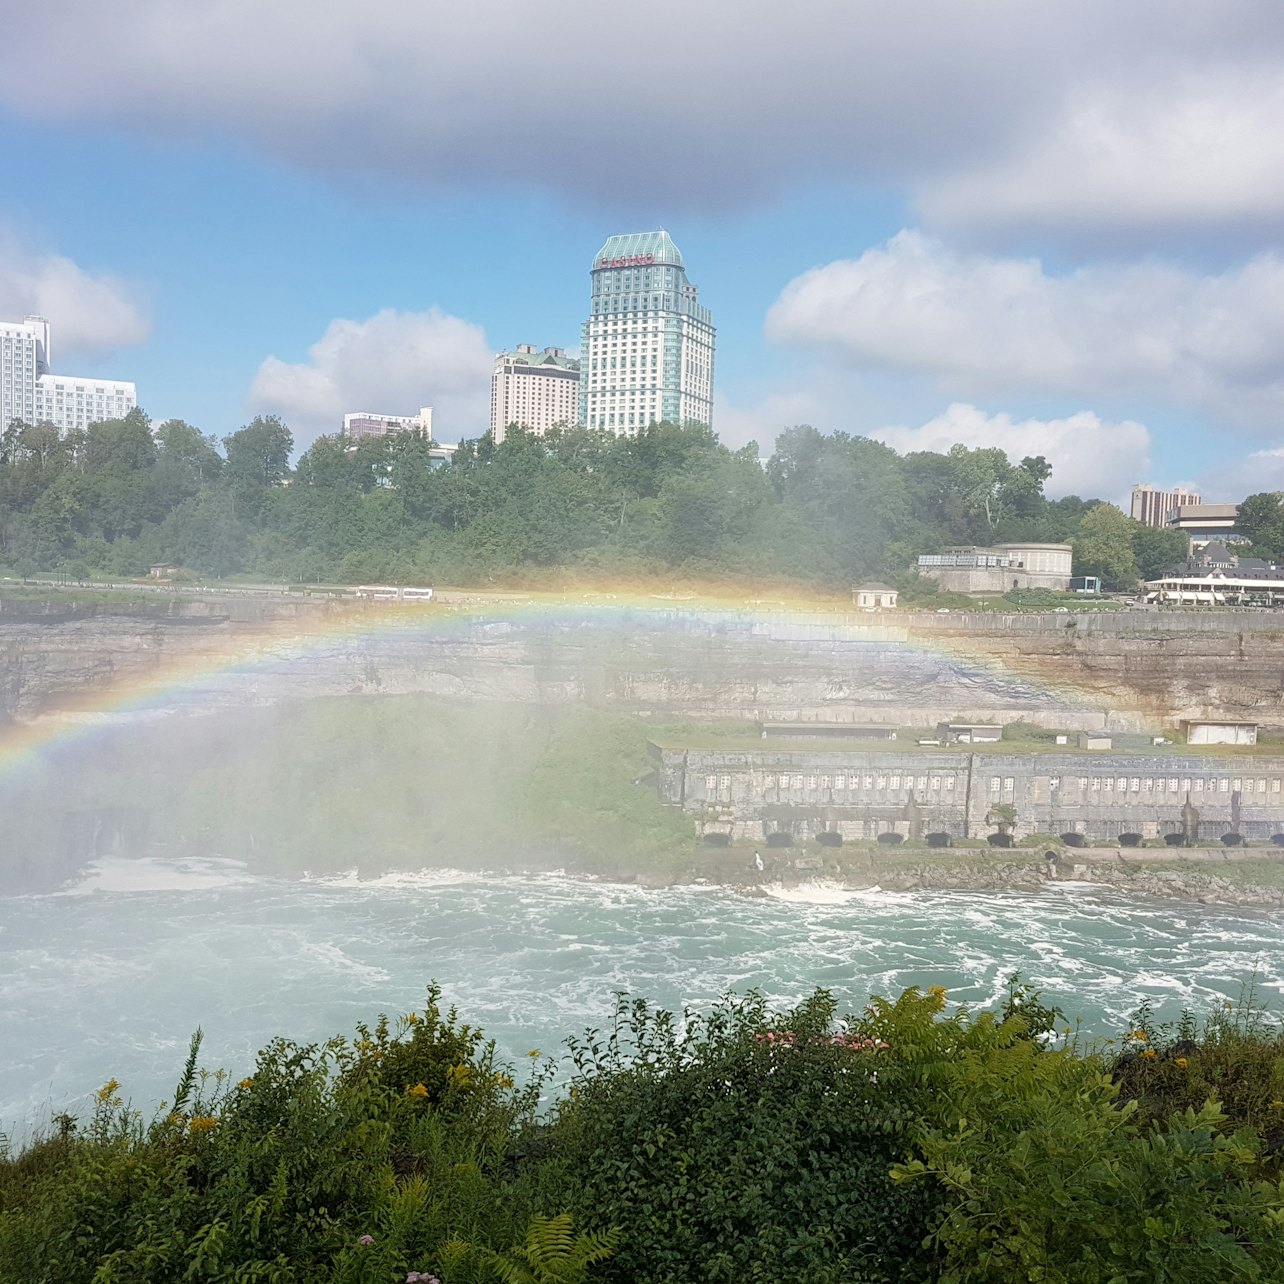 Canadian Falls Tour with Boat Cruise & Skylon Tower - Accommodations in Niagara Falls